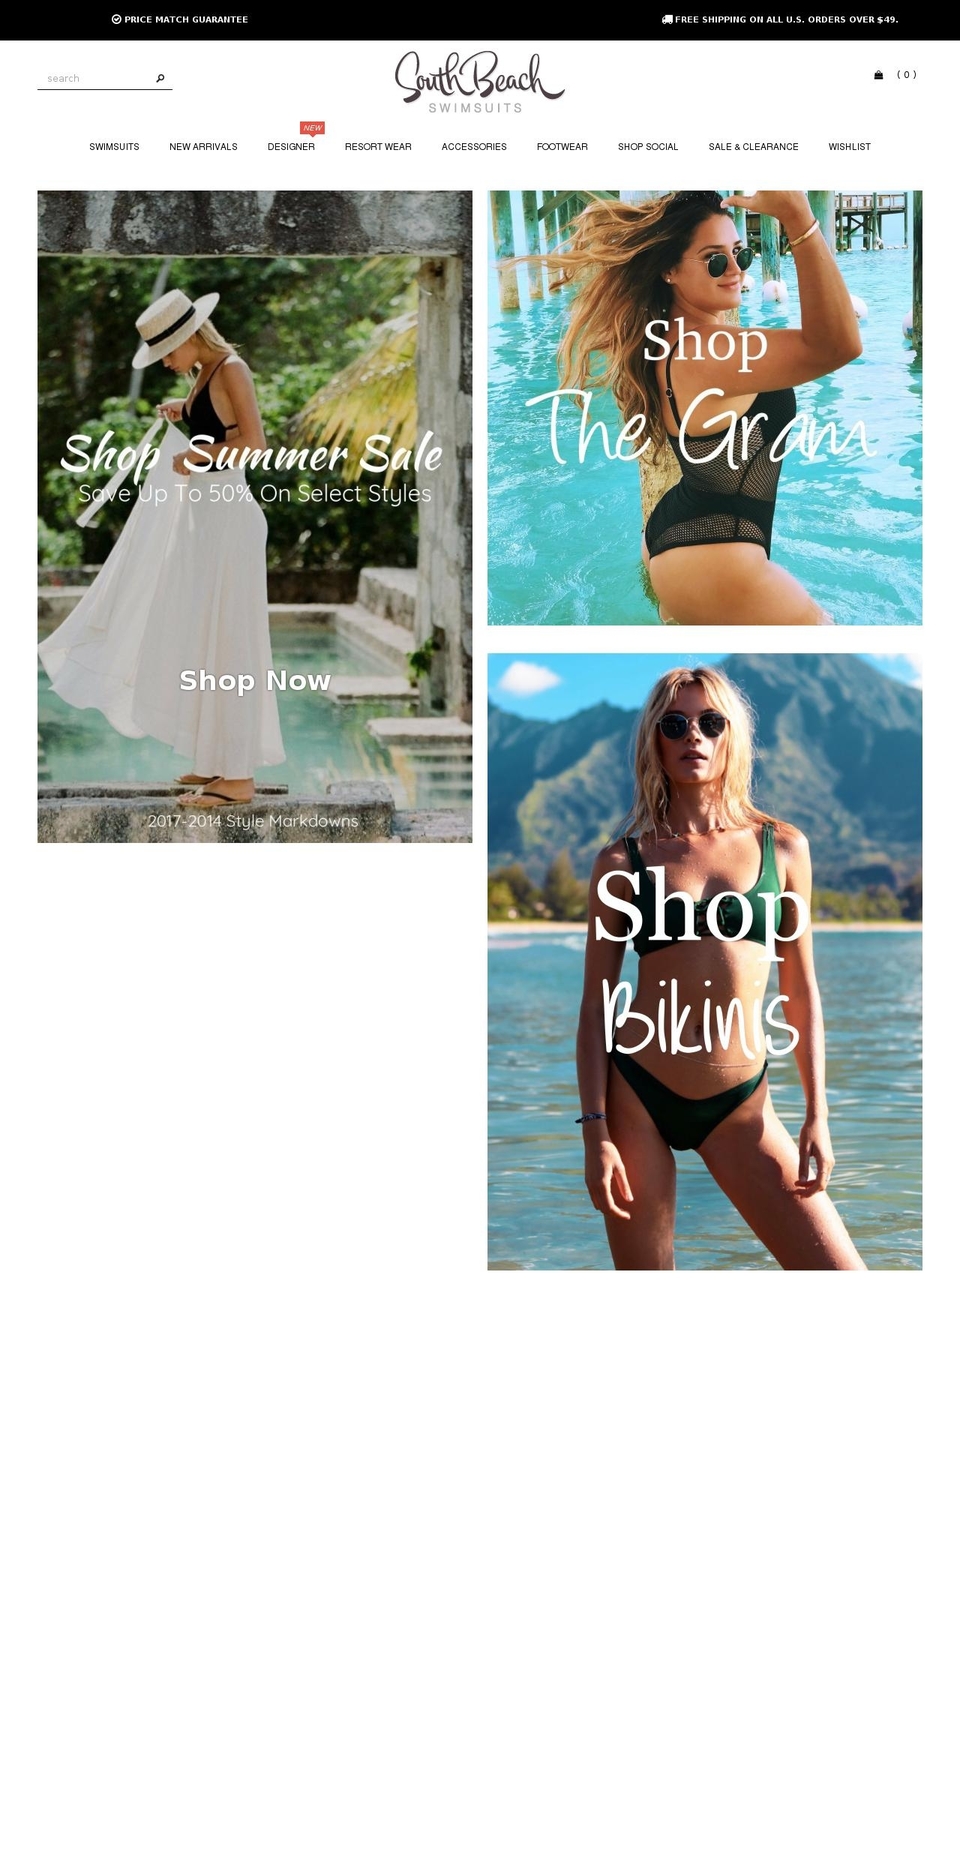 Made With ❤ By Minion Made - Updated Checkout Shopify theme site example swimwearrack.com